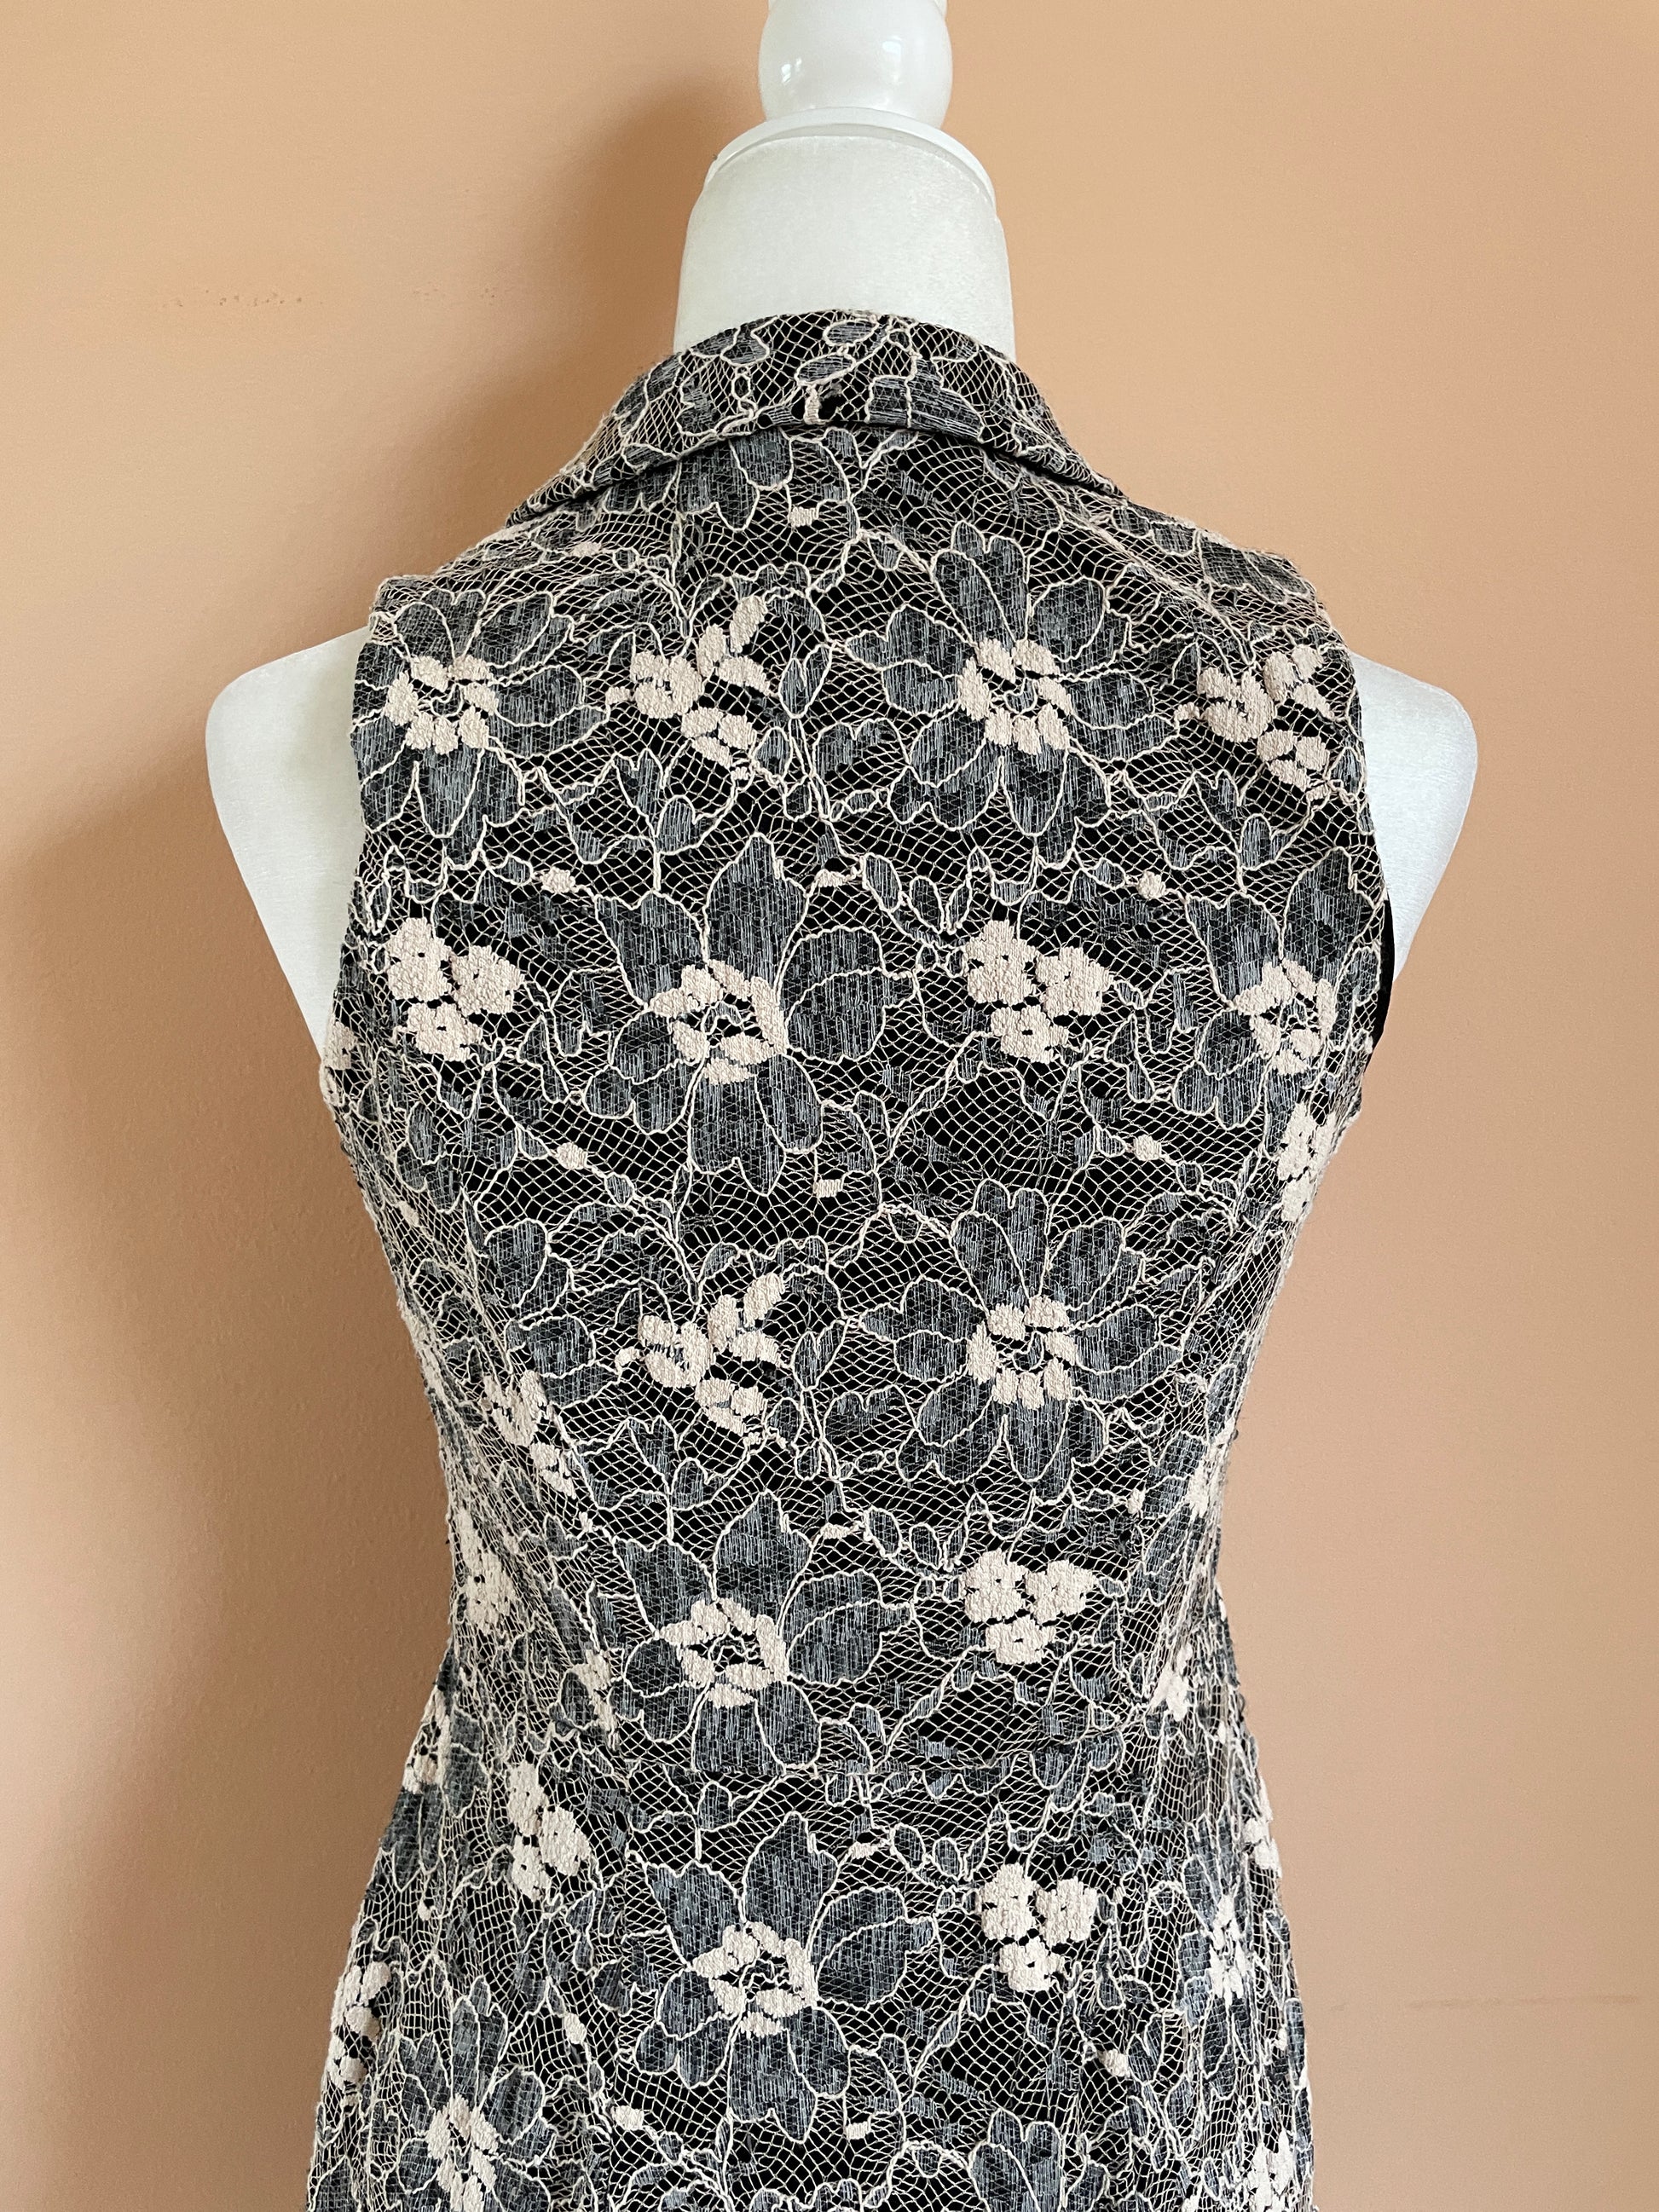  2000s Black Floral Lace Sleeveless Dress